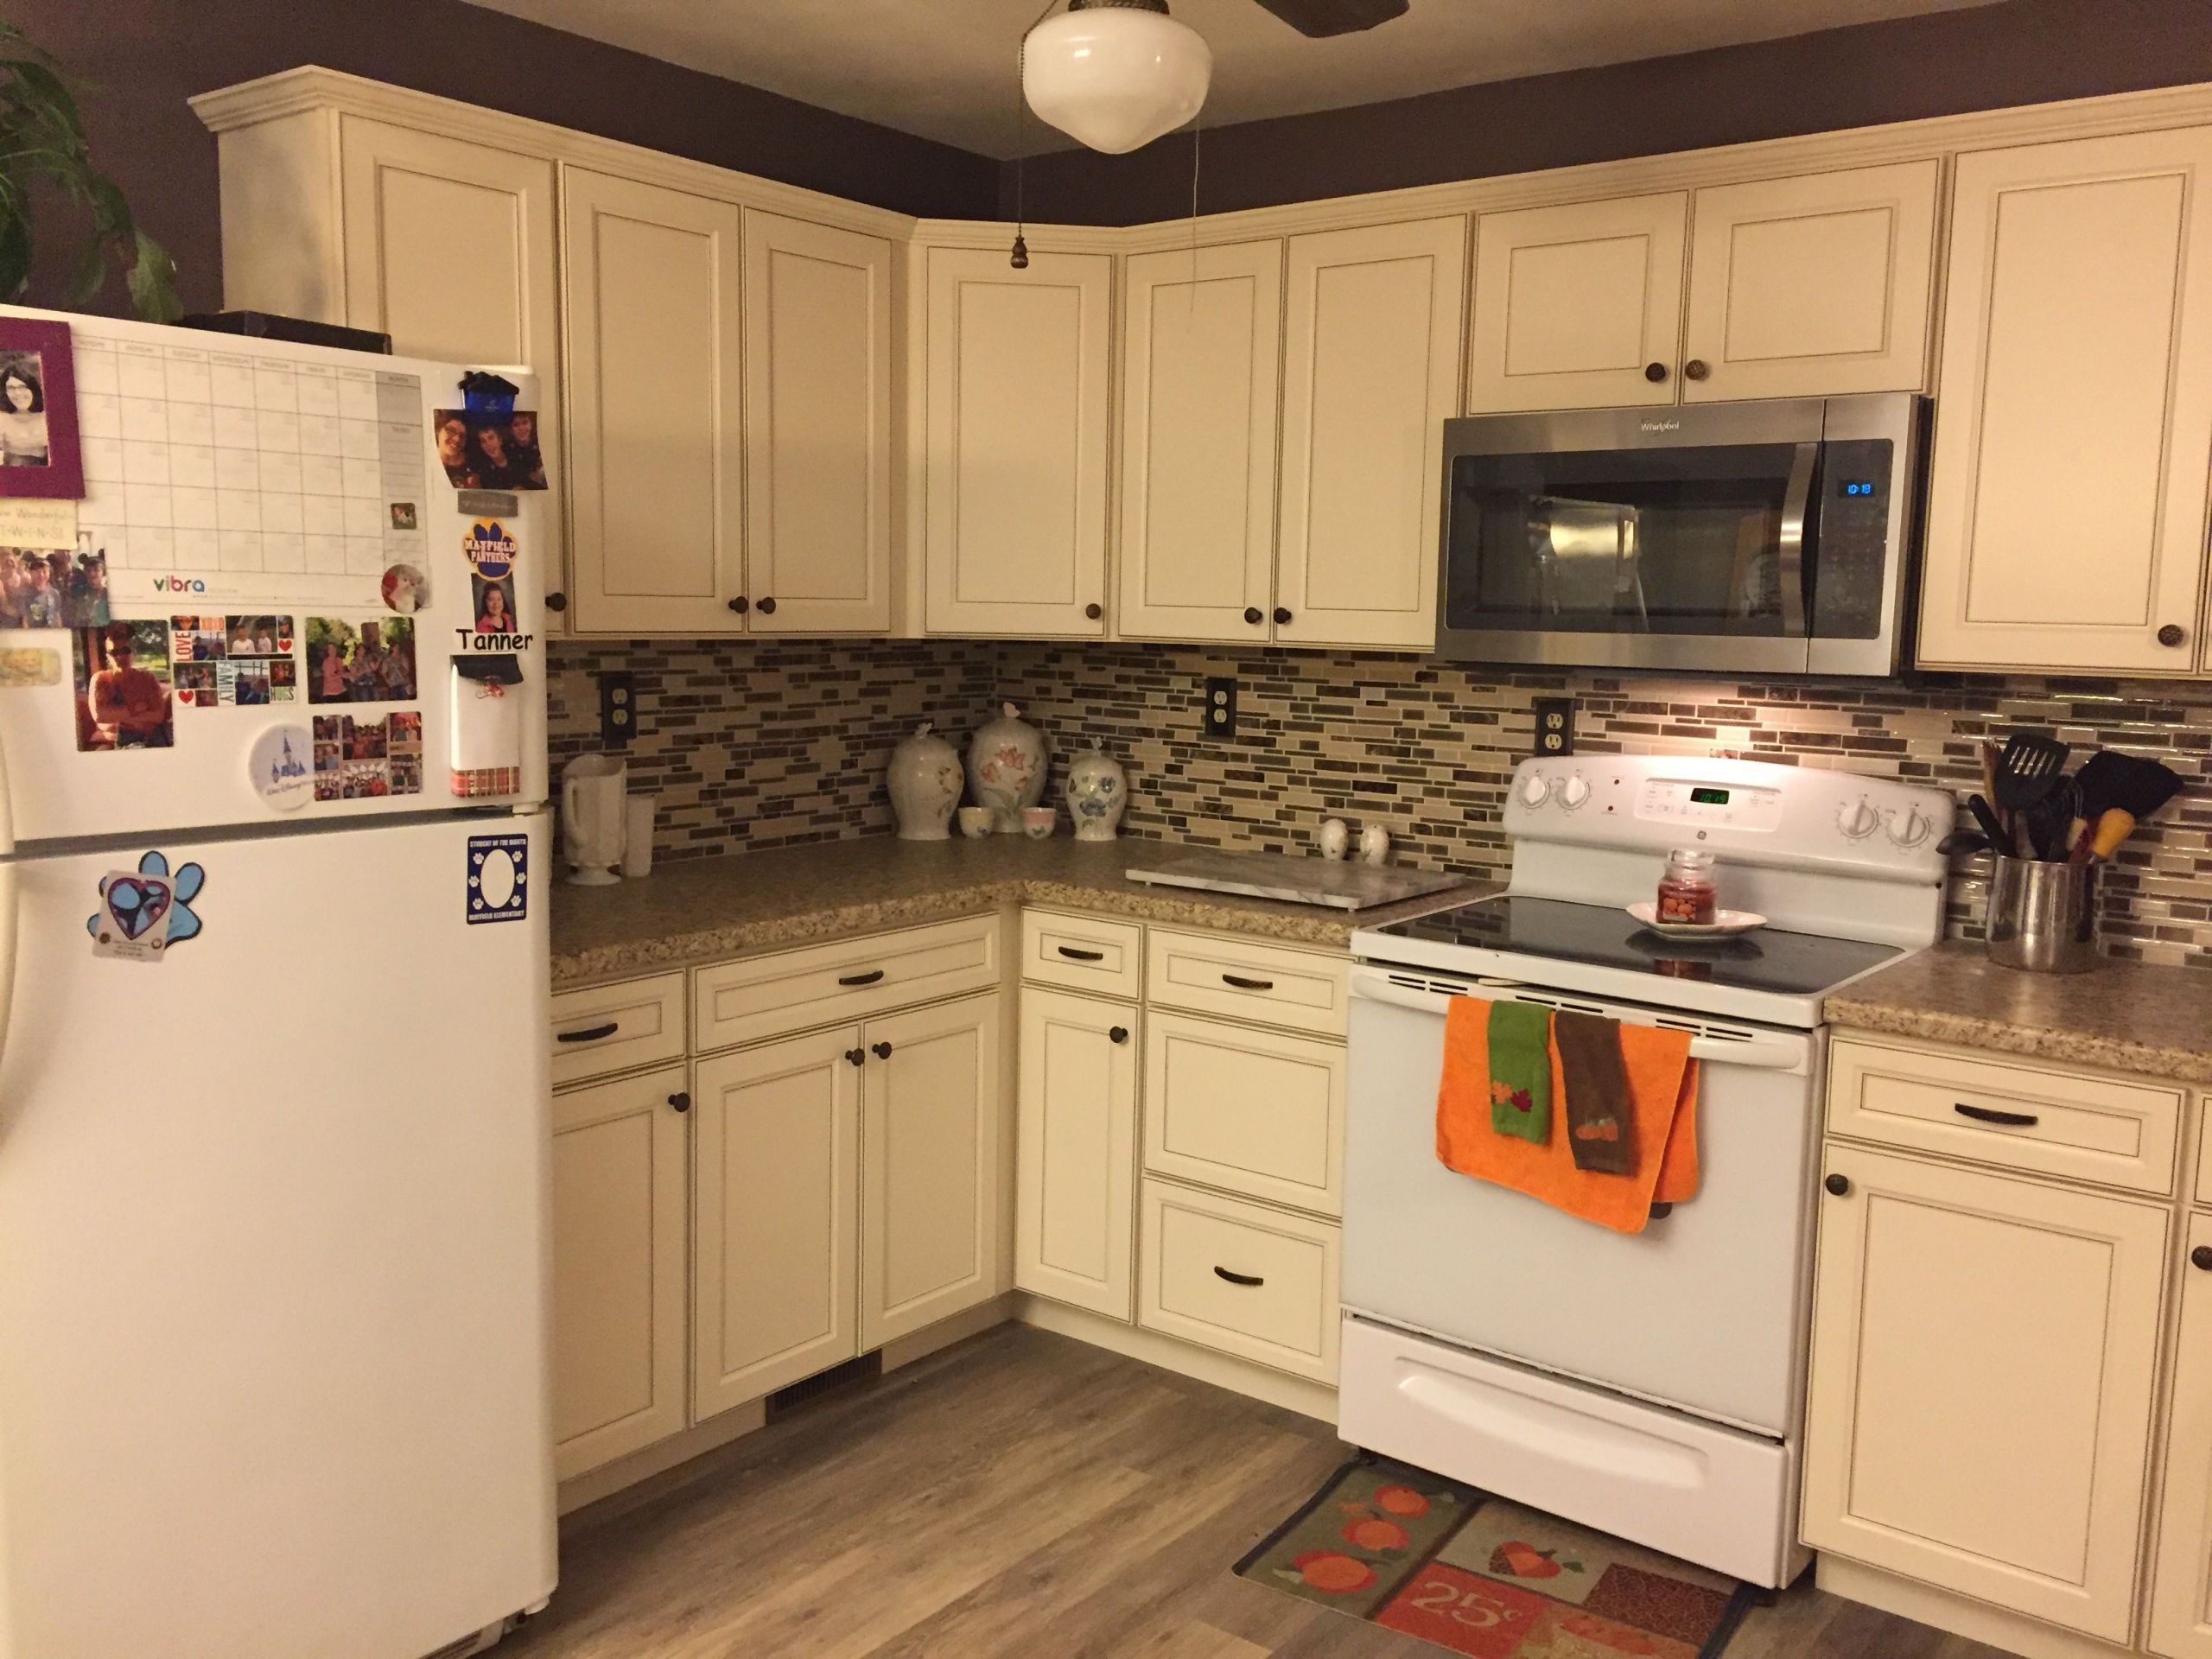 Lowes Kitchen Cabinet
 Lowes Caspian Cabinets in 2019